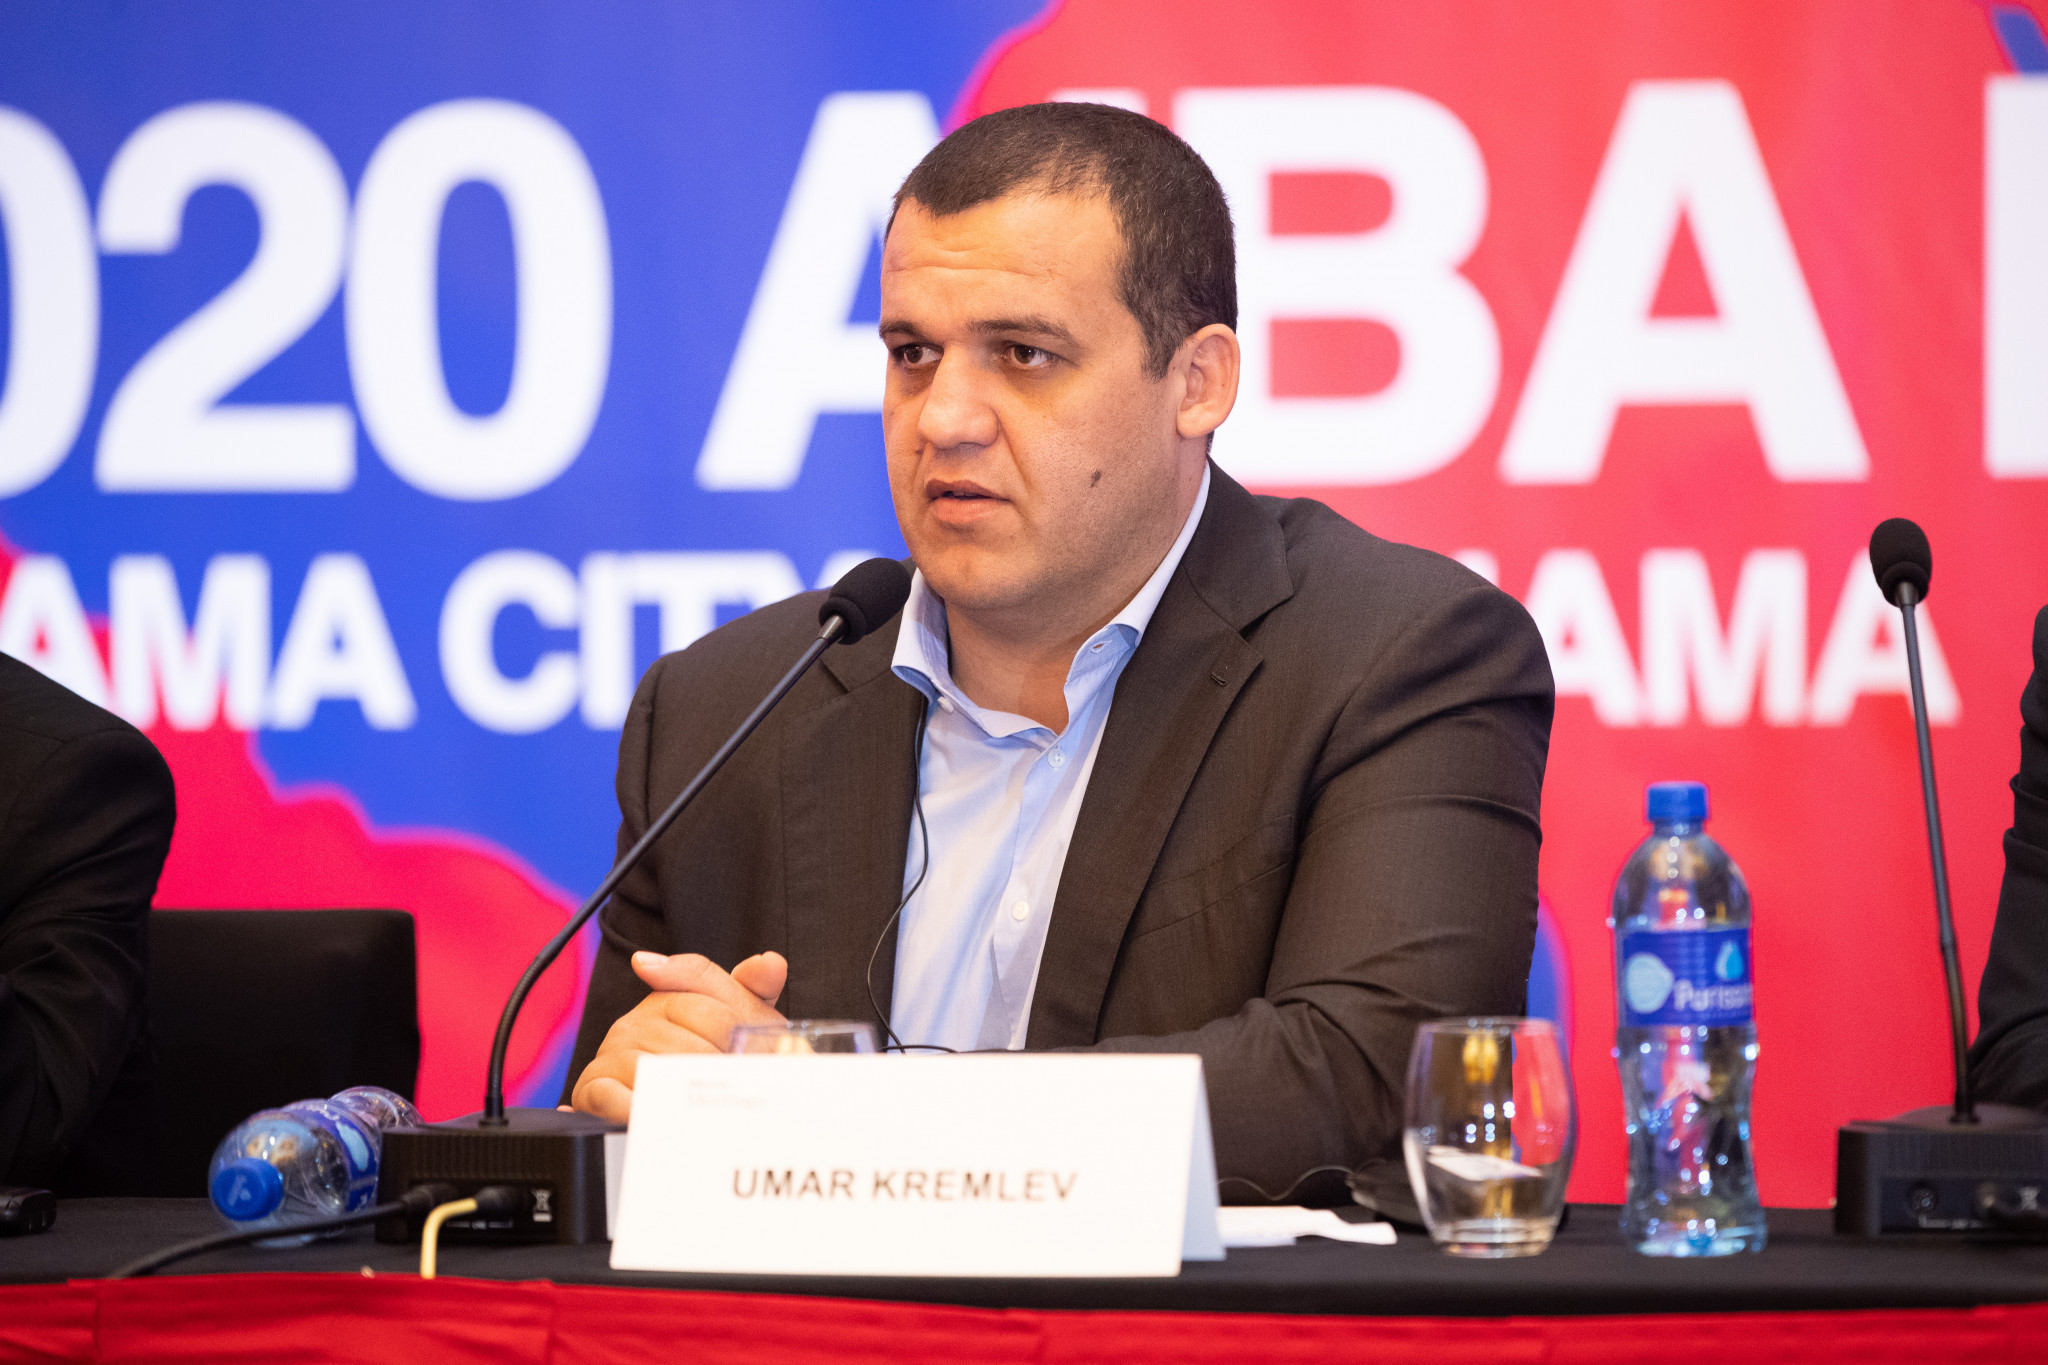 Following his election this month, new AIBA President Umar Kremlev pledged the organisation would be out of debt within six months ©AIBA